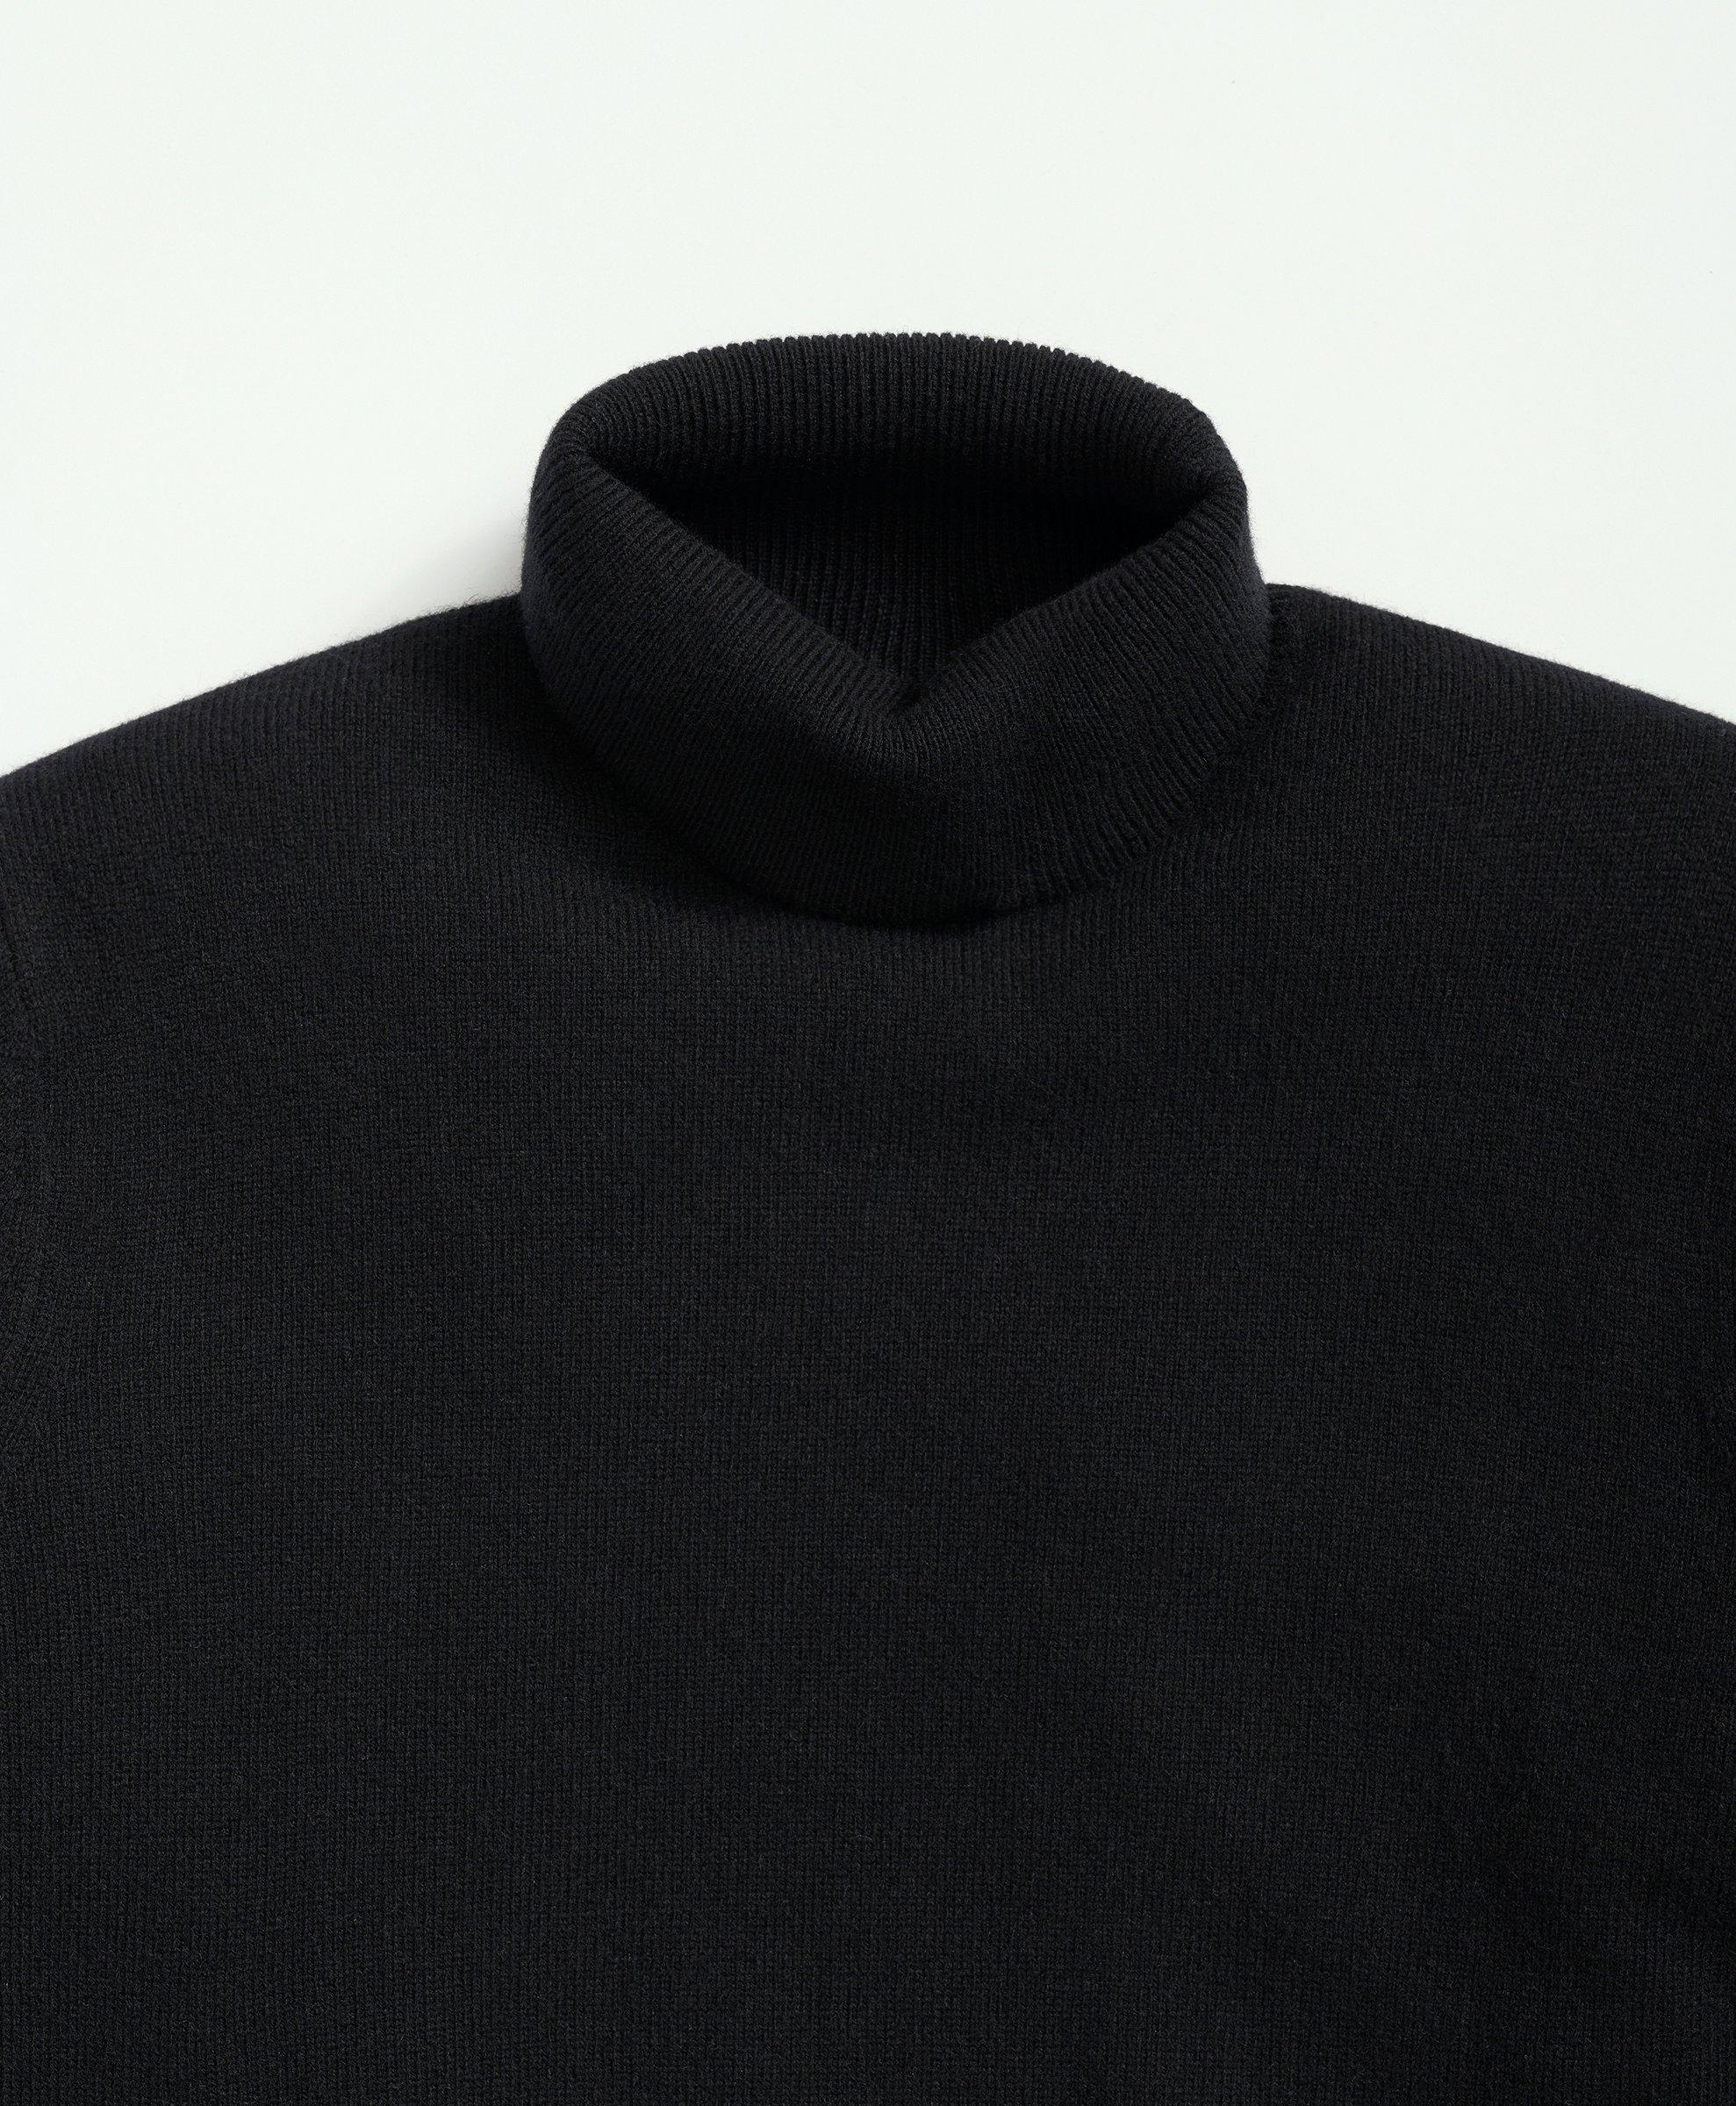 Brooks Brothers Men's 3-Ply Cashmere Turtleneck Sweater | Black | Size Large - Shop Holiday Gifts and Styles